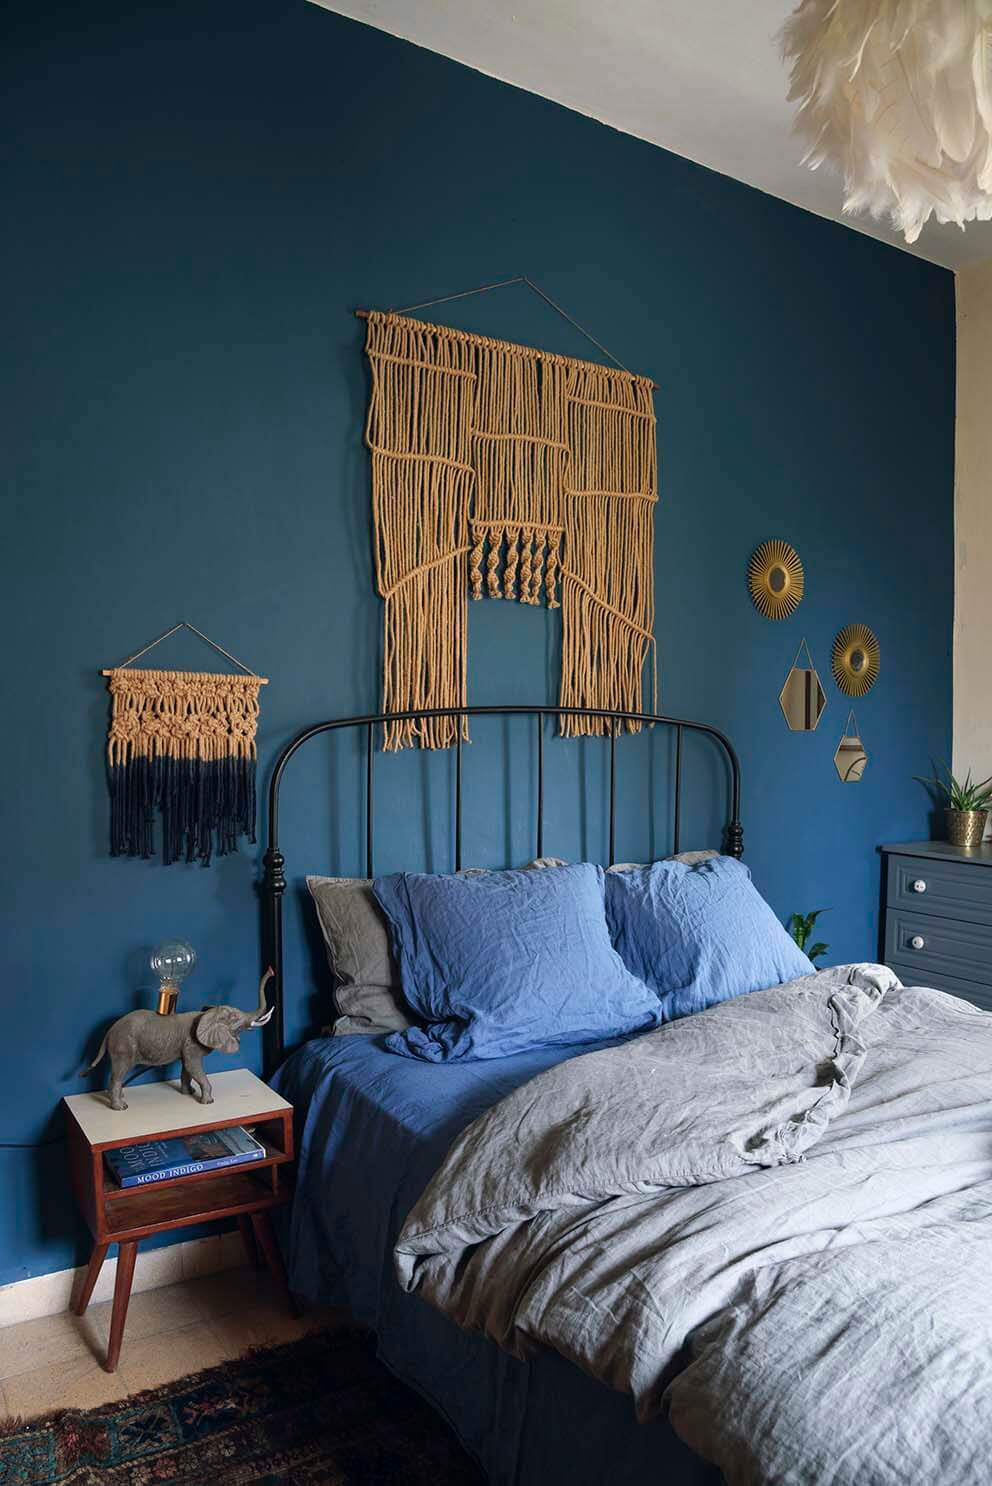 Blue Walls Bedroom
 This Is How To Decorate With Blue Walls